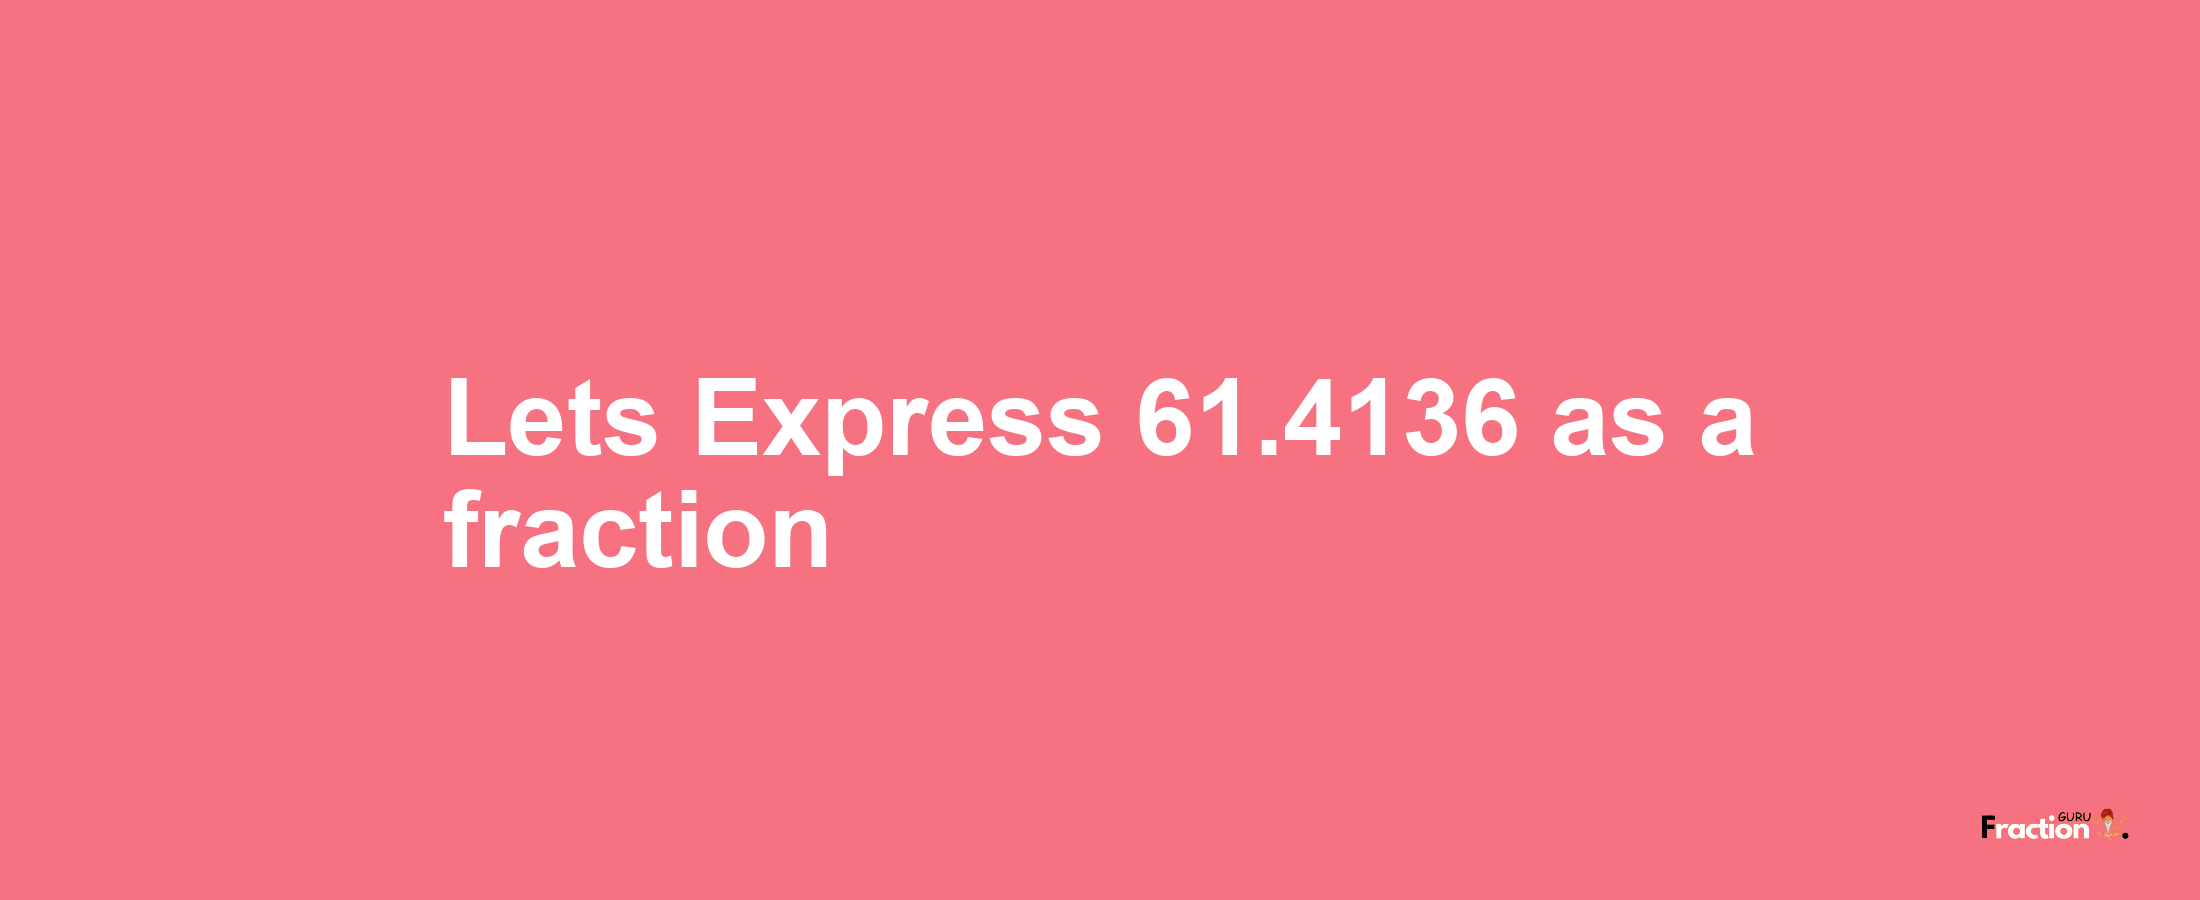 Lets Express 61.4136 as afraction